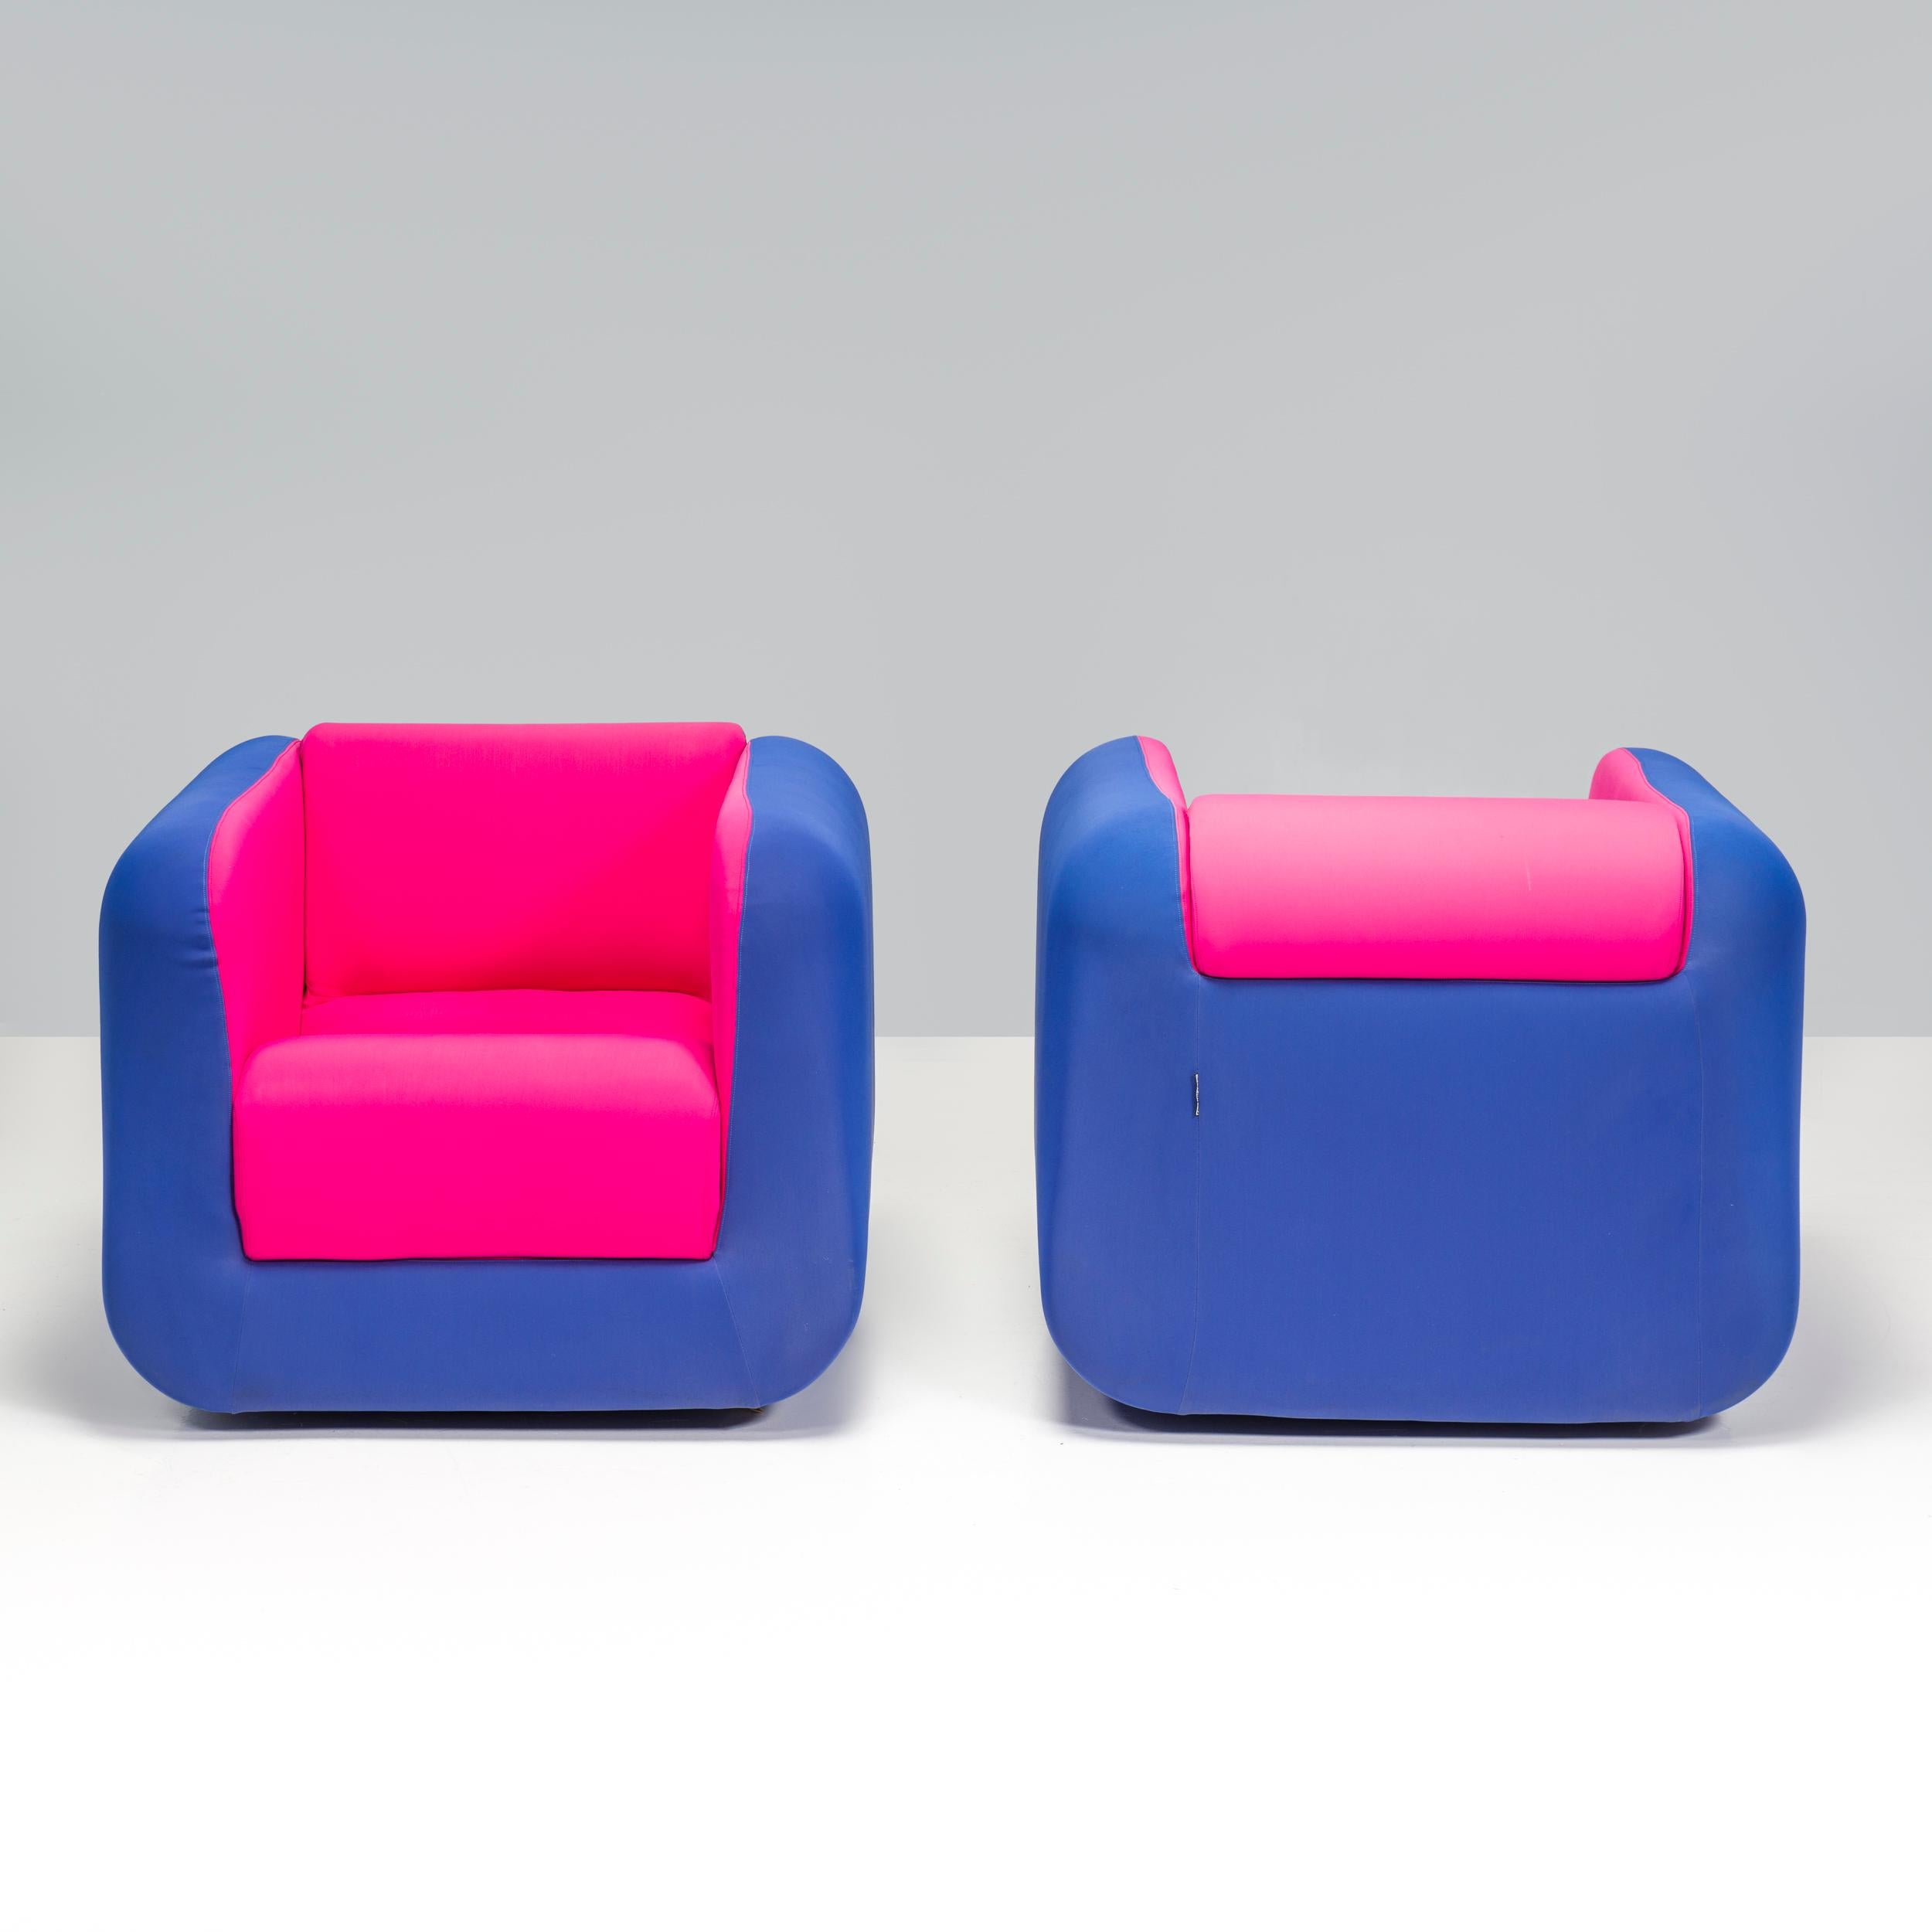 French Roche Bobois Pink & Blue Cube Armchairs, Set of 2 For Sale